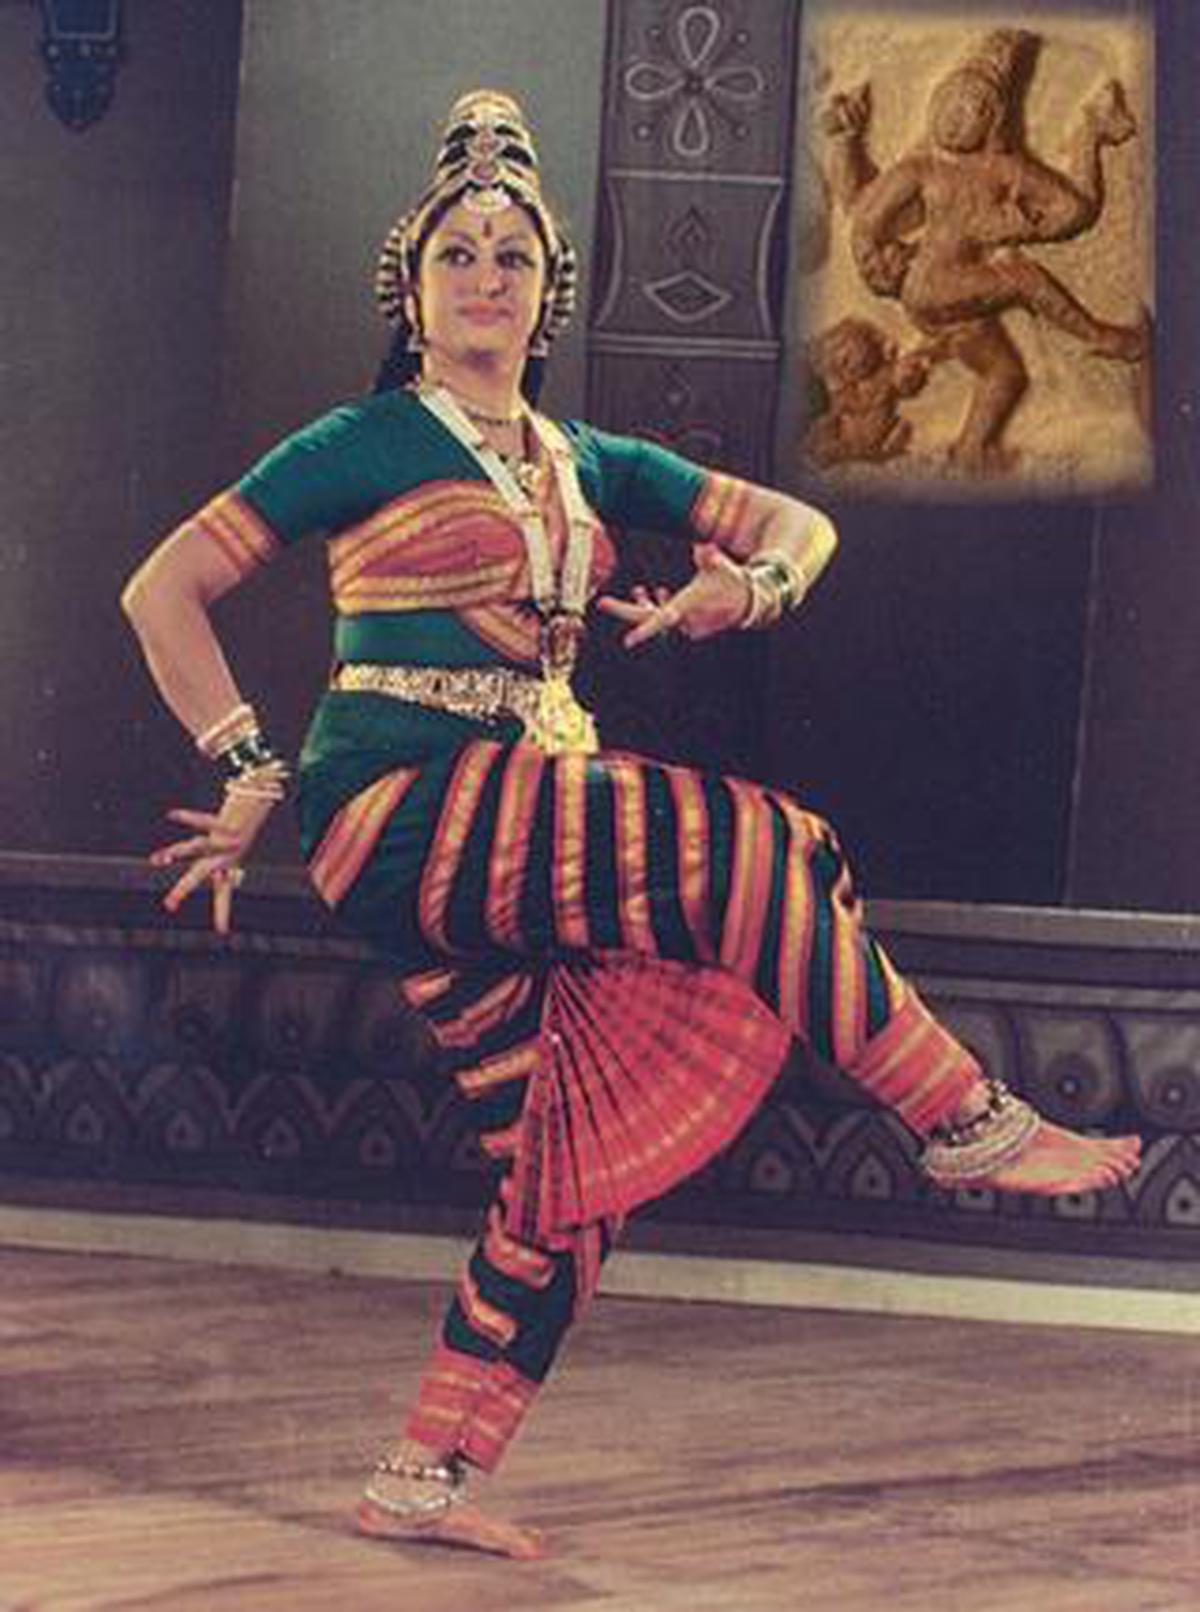 Padma Subrahmanyam’s dance is inspired by temple sculptures and murals